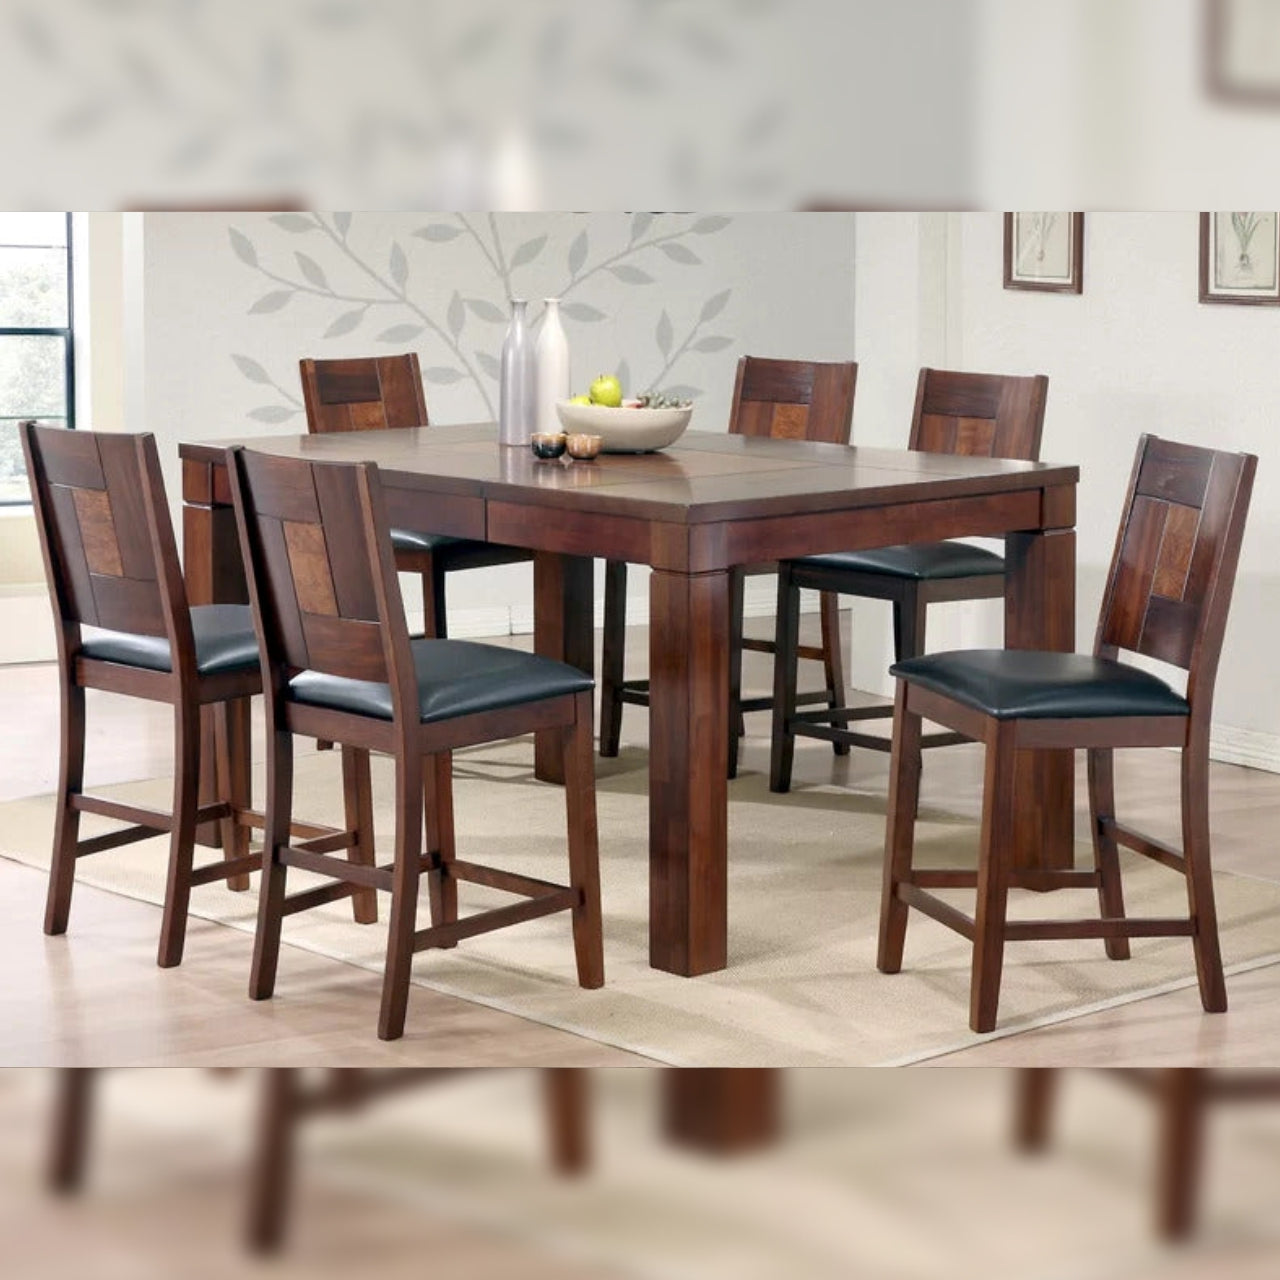 Dining Set Dining Table with 6 Chairs Butterfly Leaf Dining Set